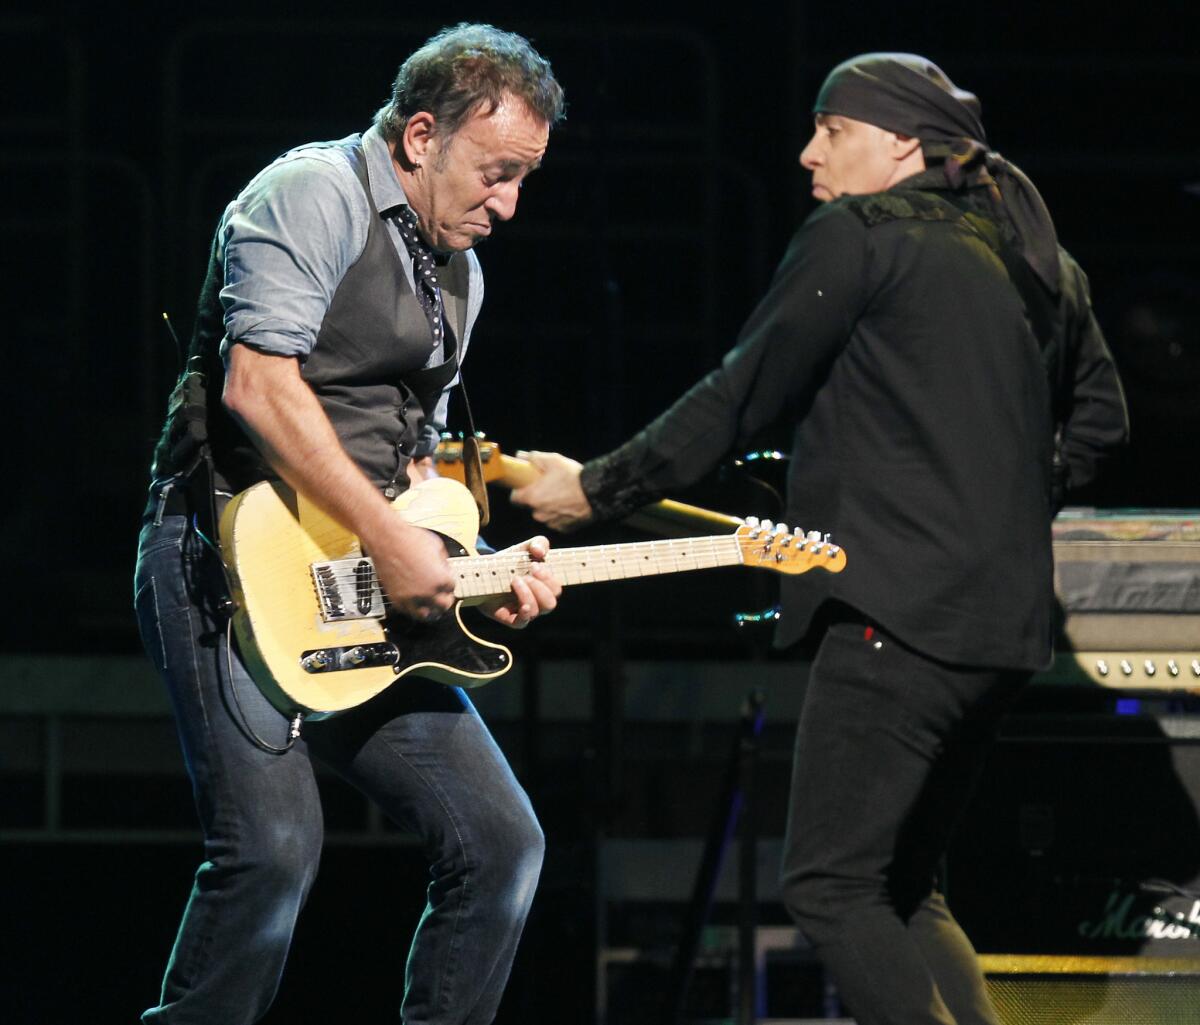 Bruce Springsteen performs with longtime E Street Band mate Stevie Van Zandt during a 2012 tour stop in Anaheim. Springsteen and the band have recorded a new studio version of the Suicide song "Dream Baby Dream" and posted a new video to mark the end of the Wrecking Ball tour.